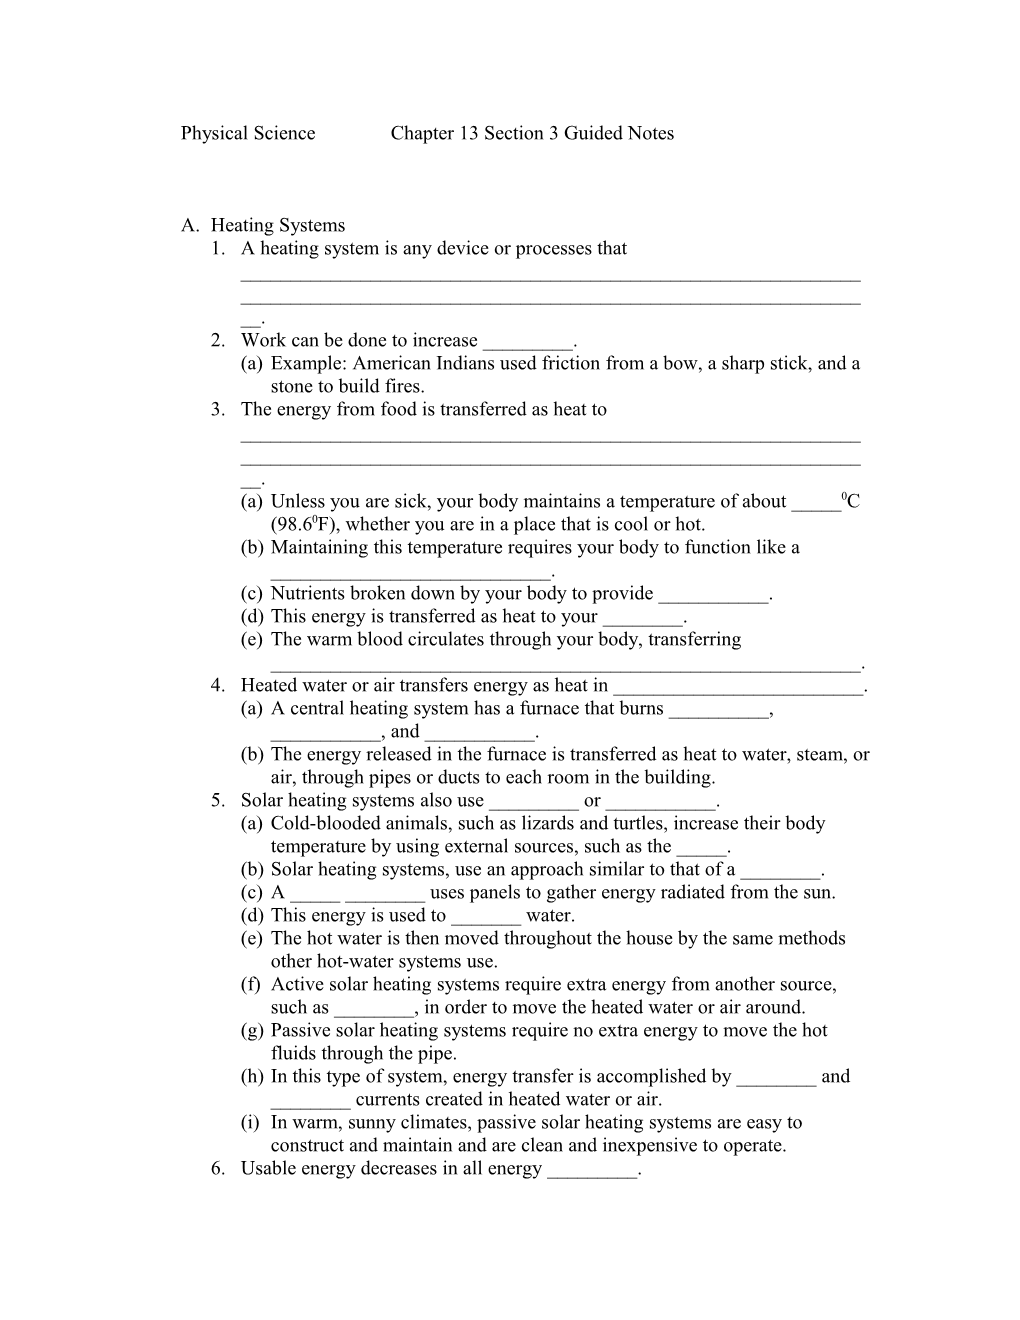 Physical Science Chapter 13 Section 3 Guided Notes